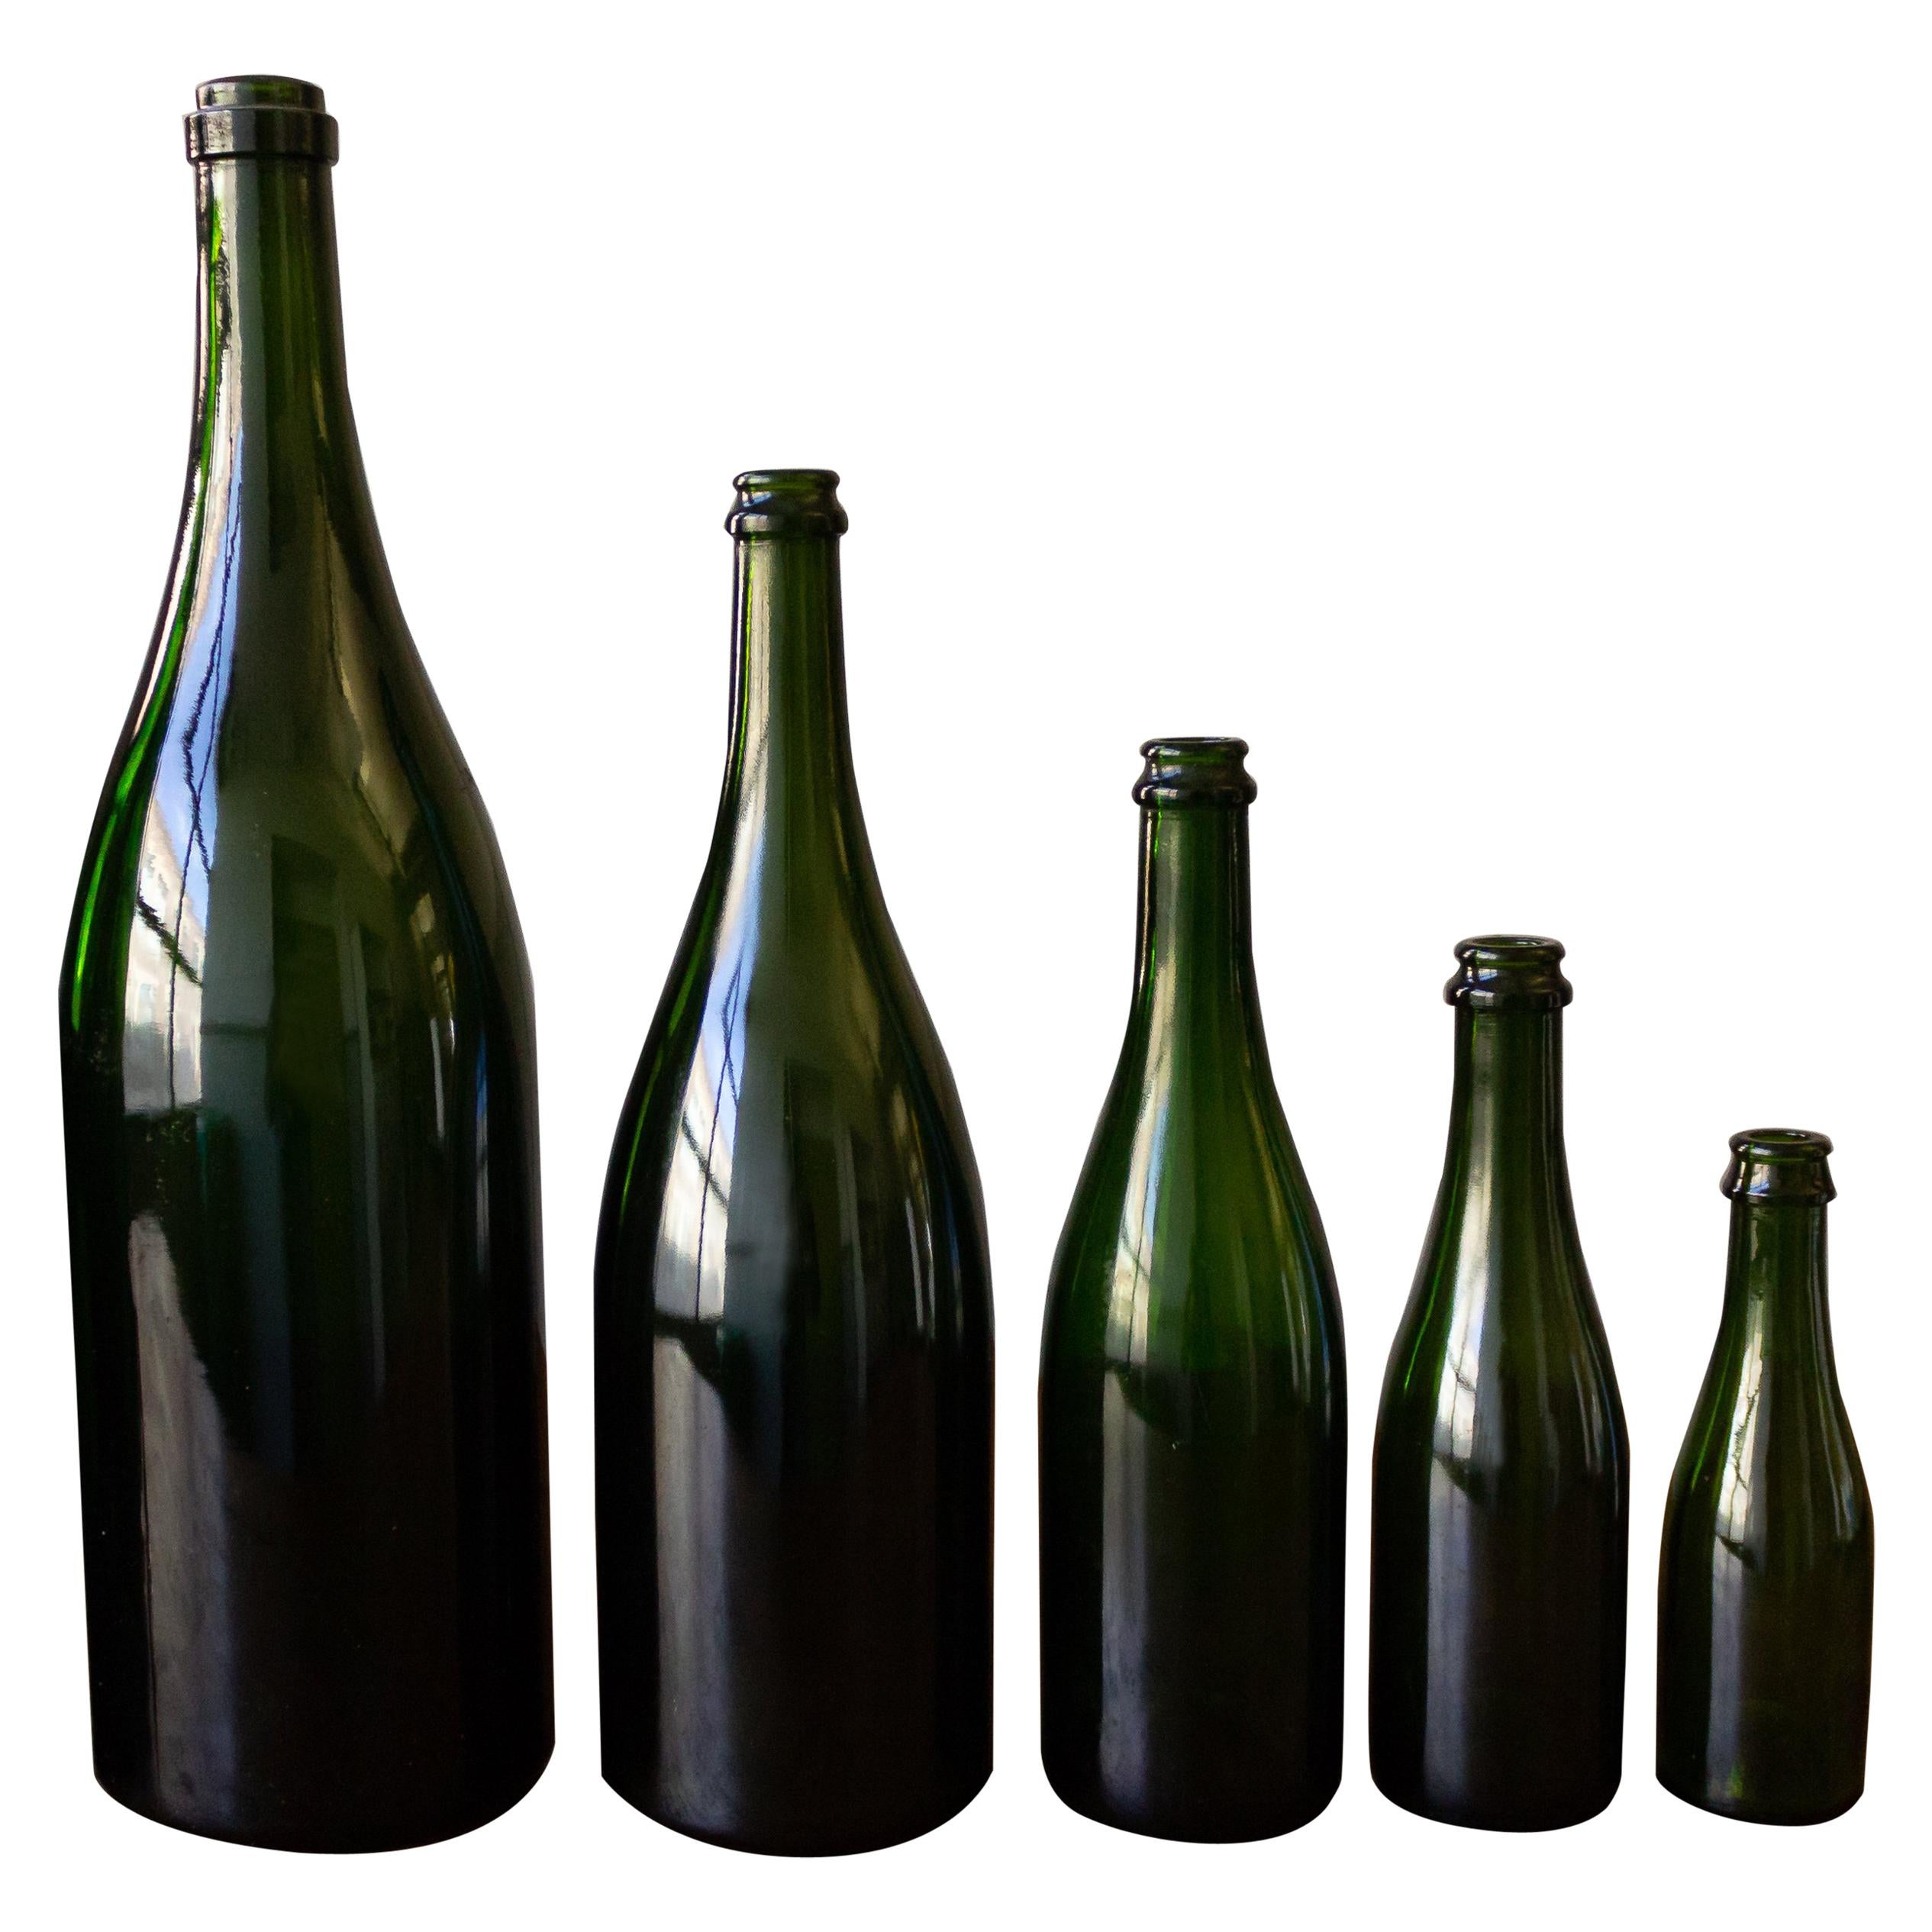 This set of eight vintage French champagne bottles from the 1920s offers a unique charm. Their sizes vary, ranging from 7.5